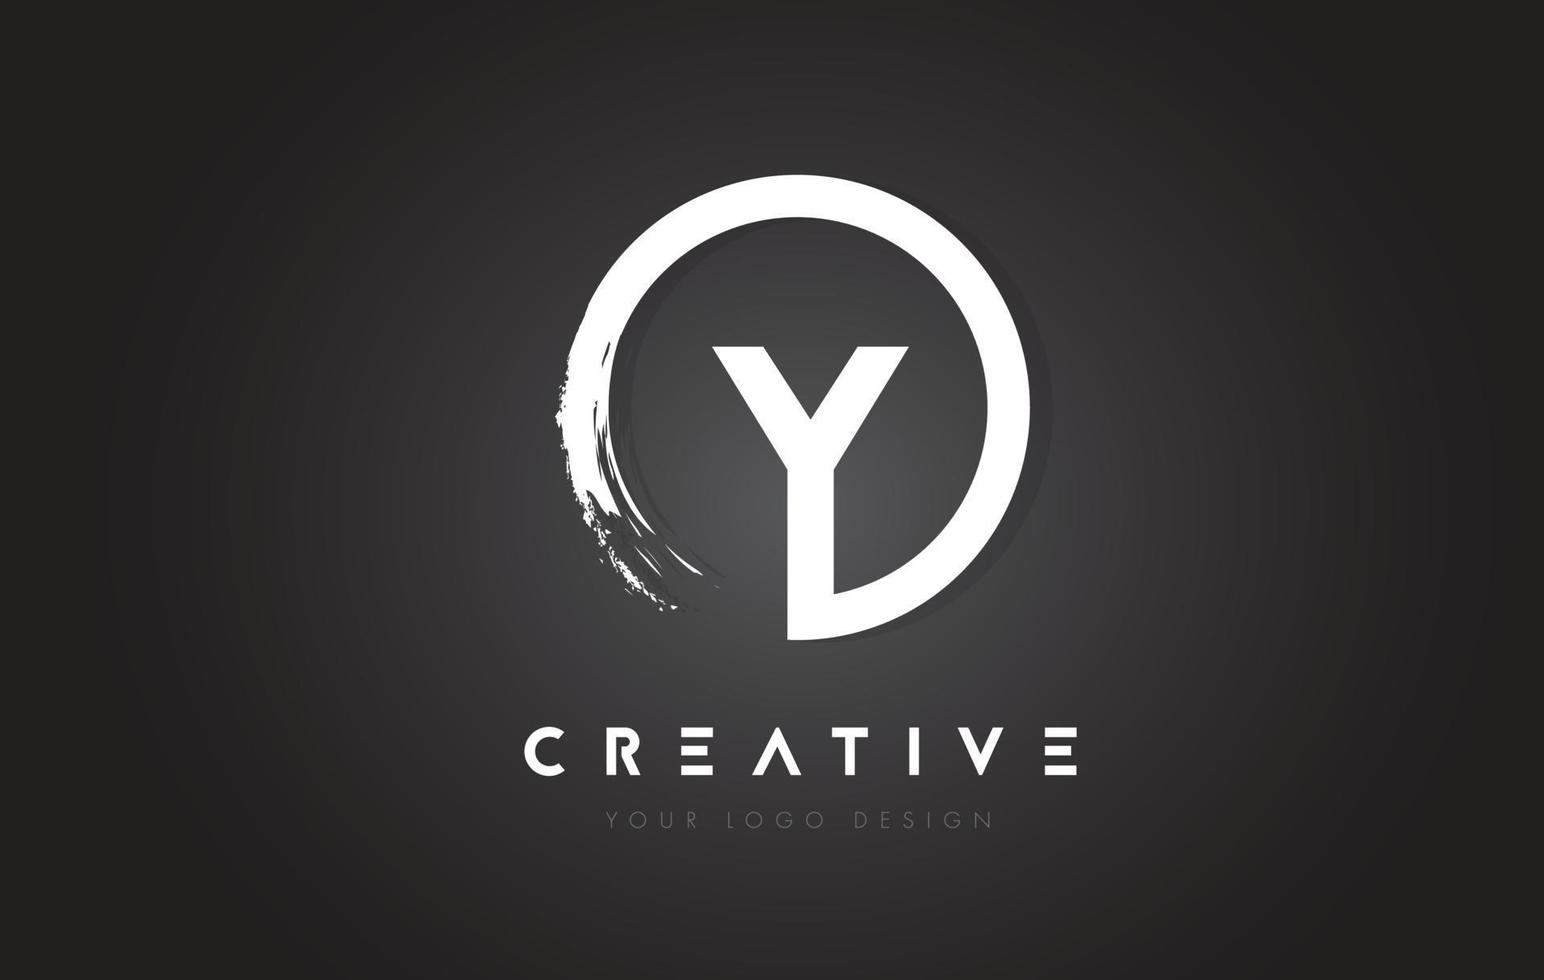 Y Circular Letter Logo with Circle Brush Design and Black Background. vector